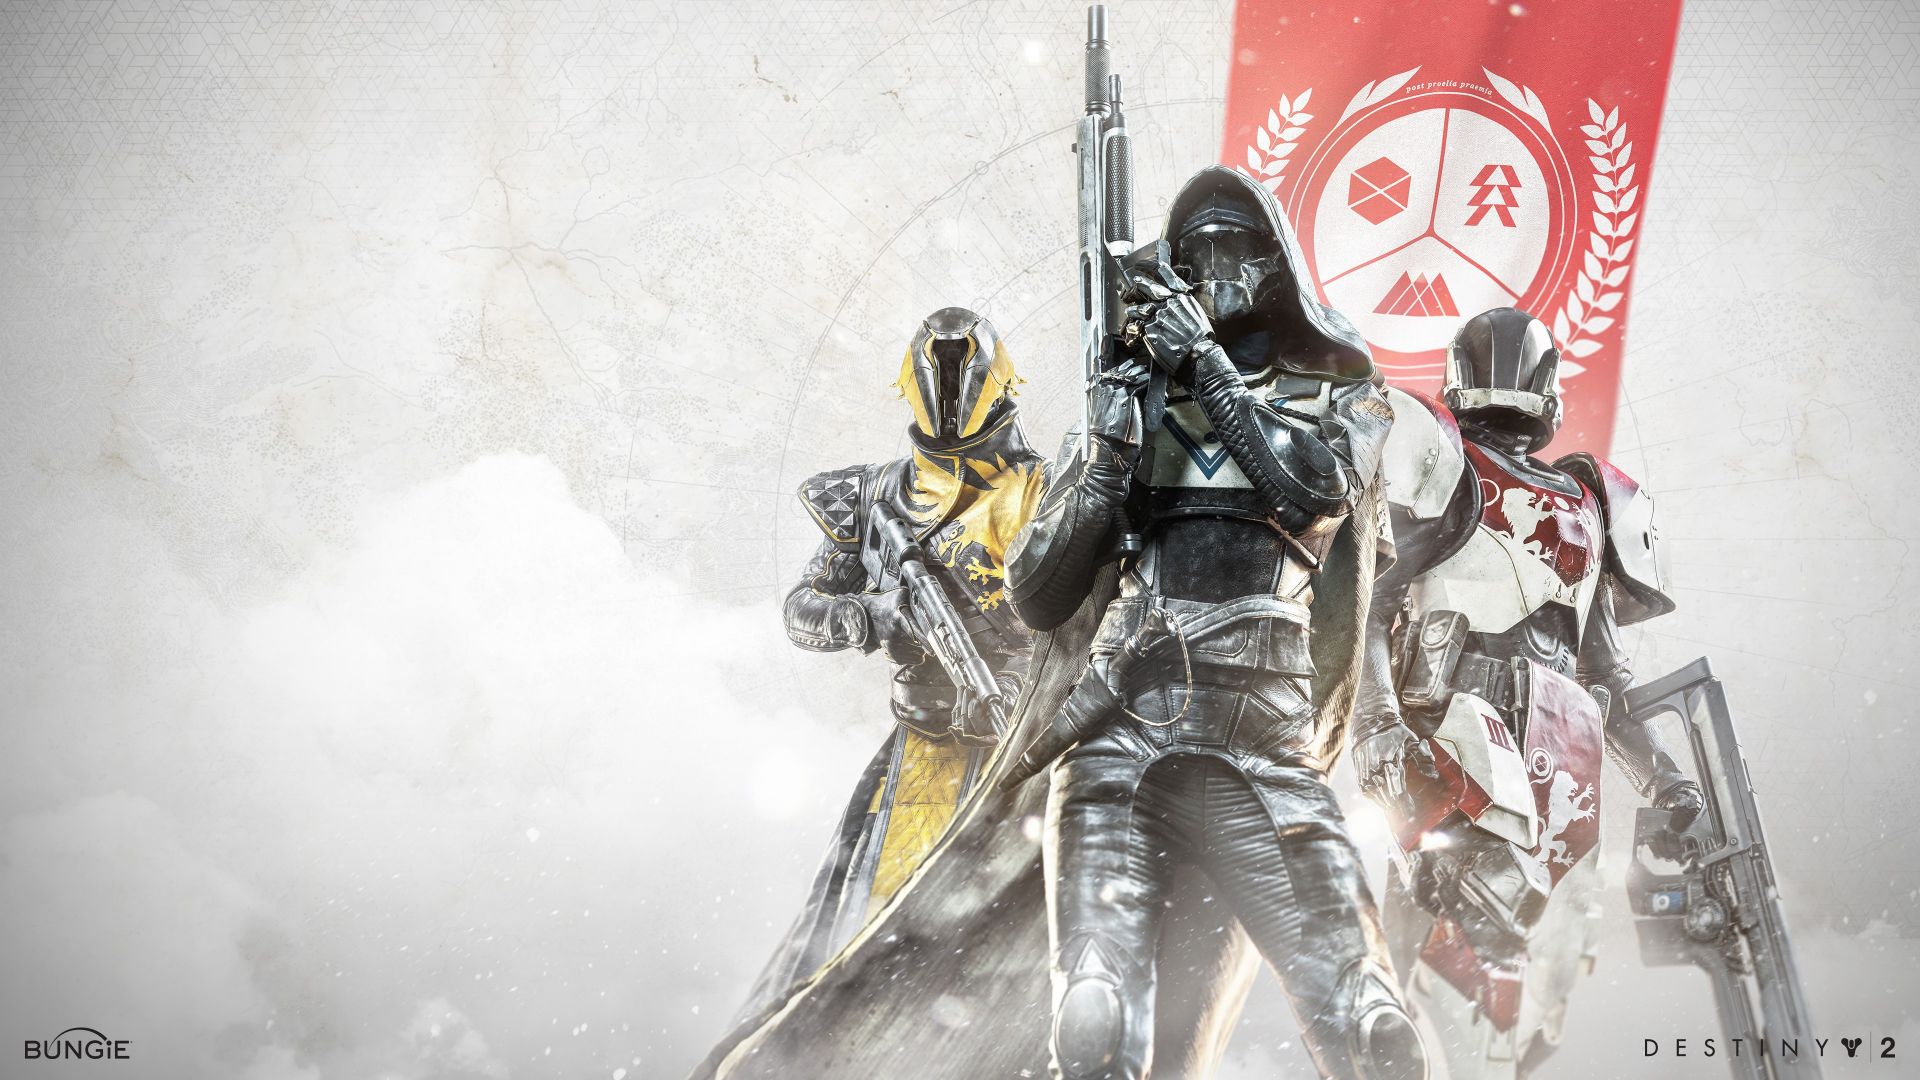 Wallpaper Destiny 2, game, all soldier